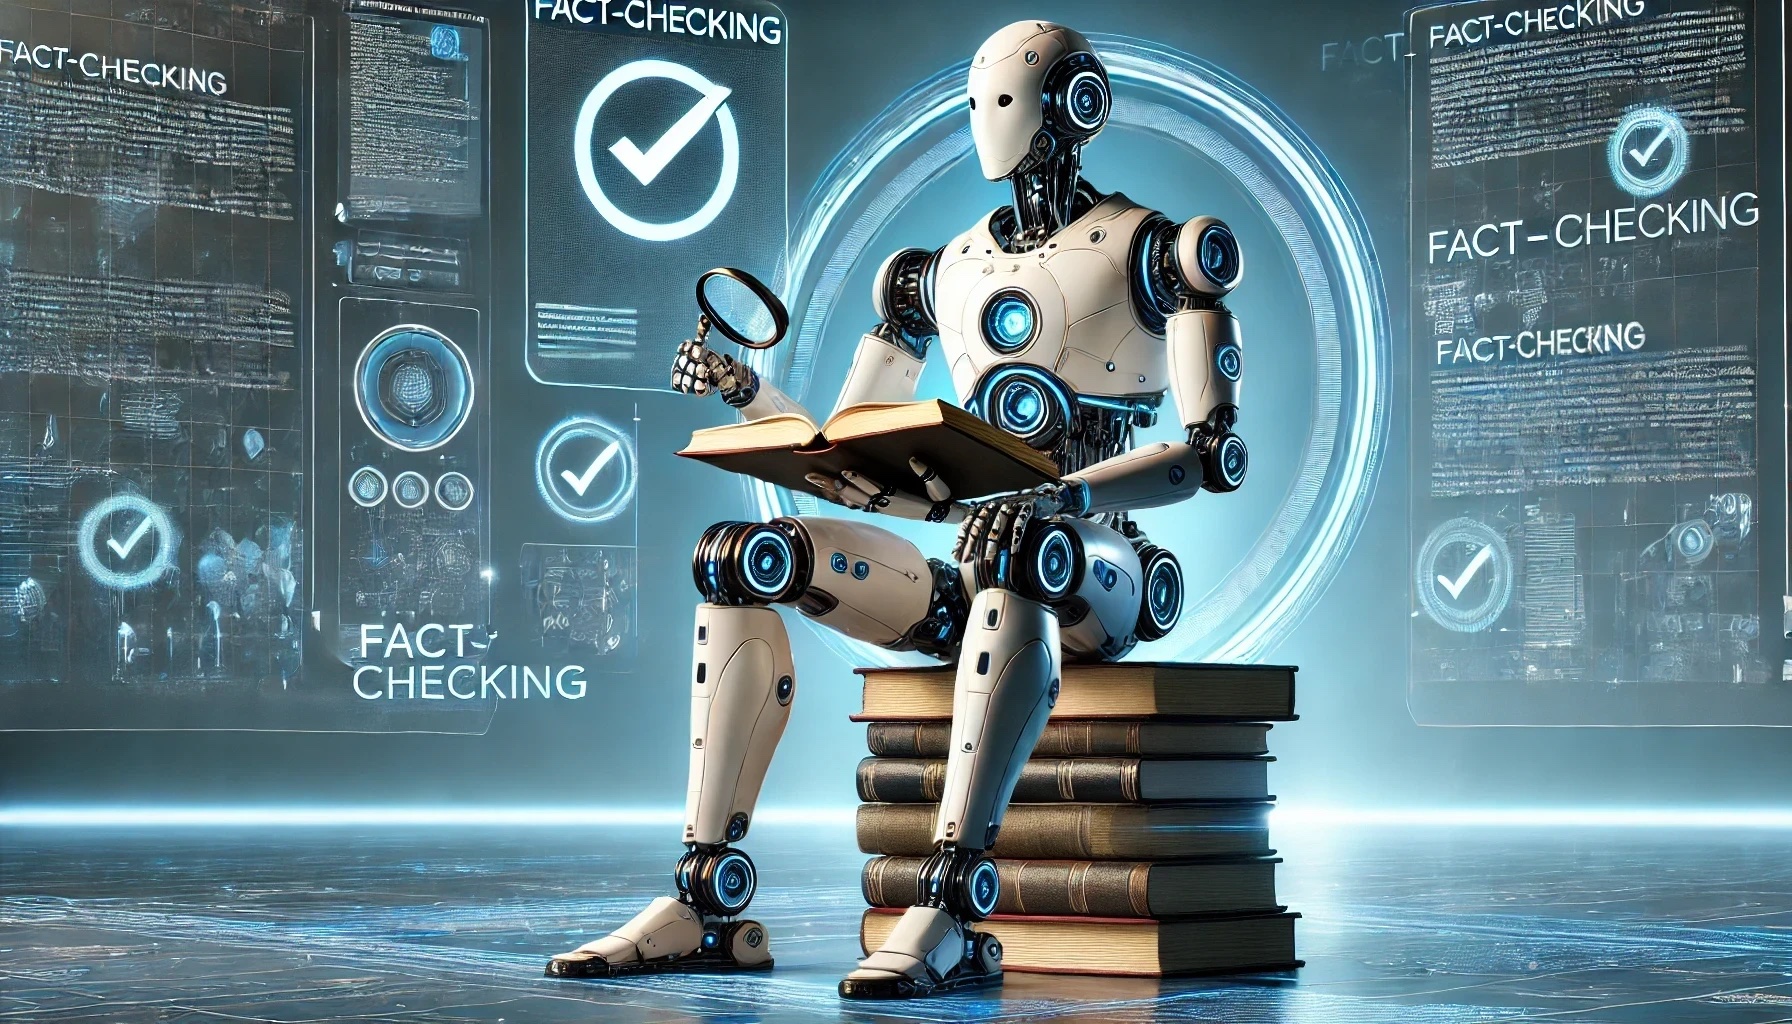 A futuristic robot with a sleek design and glowing blue accents sits on a stack of books, holding an open book and a magnifying glass with a checkmark symbol. The background features a digital interface with a holographic display labeled "Asking AI Questions" and lines of text, illuminated by a cool blue light.